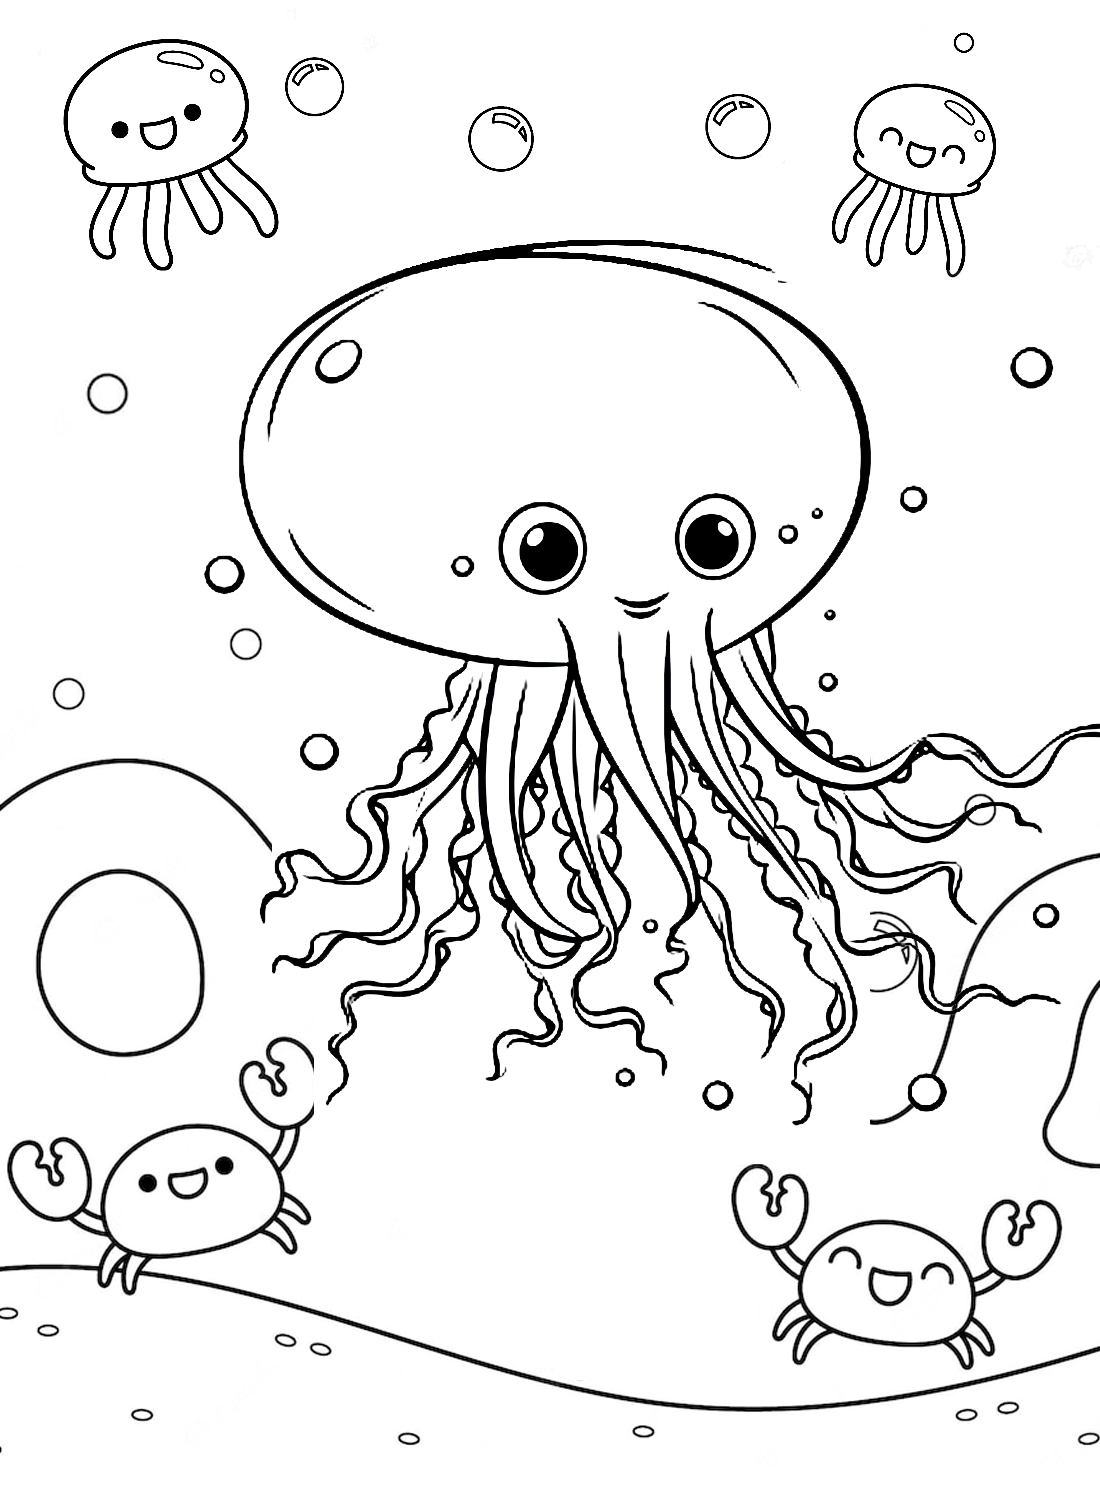 A Jellyfish smiles Coloring Page